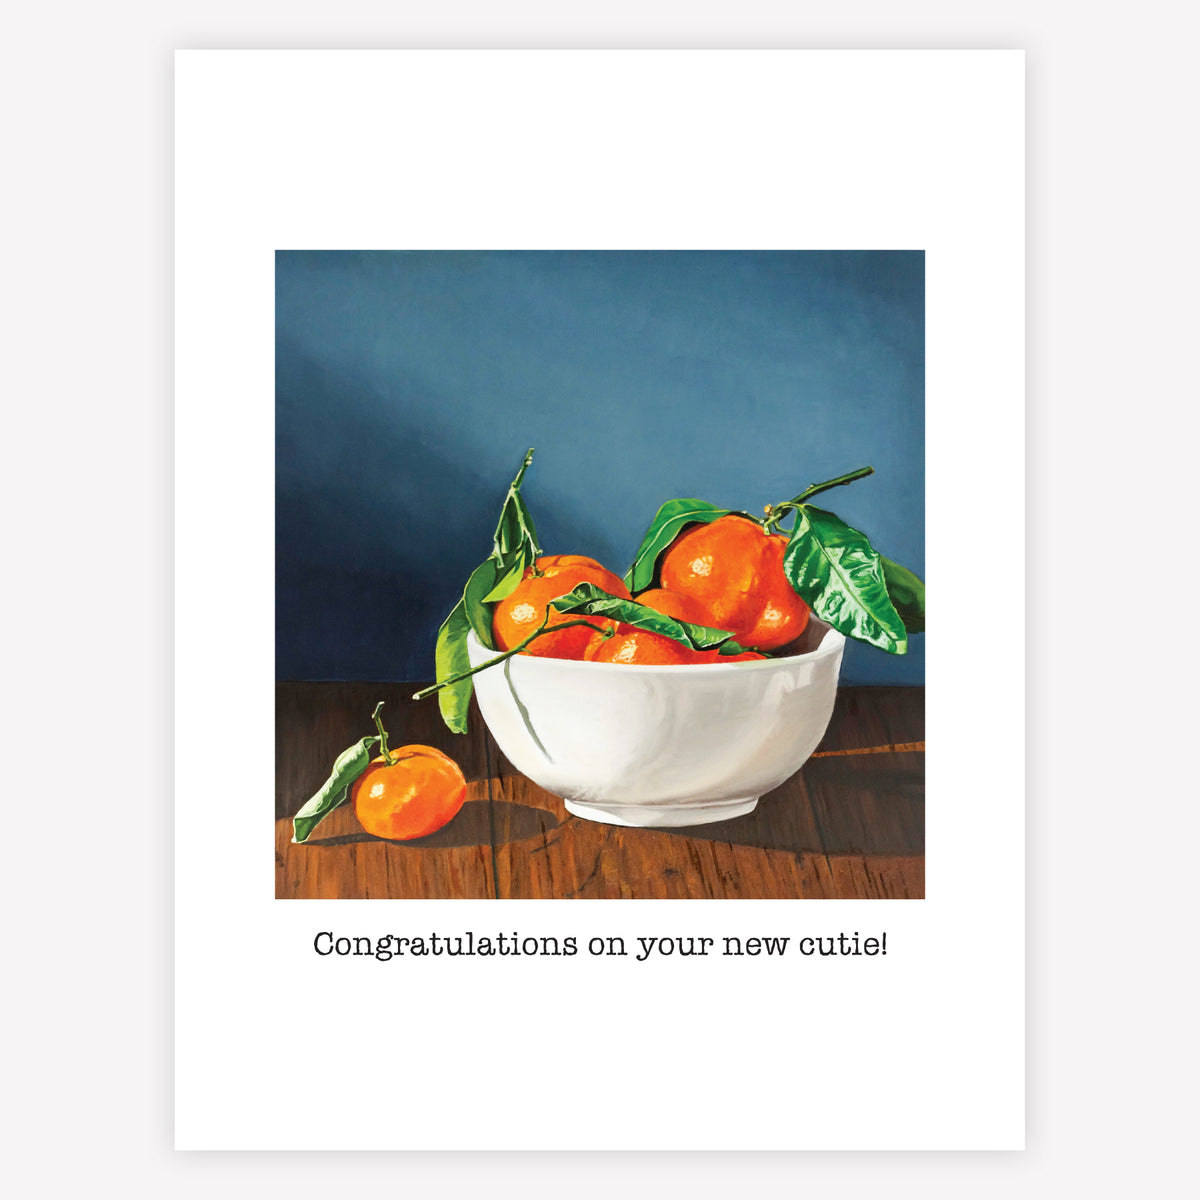 "Congratulations on your new cutie!" Greeting Card